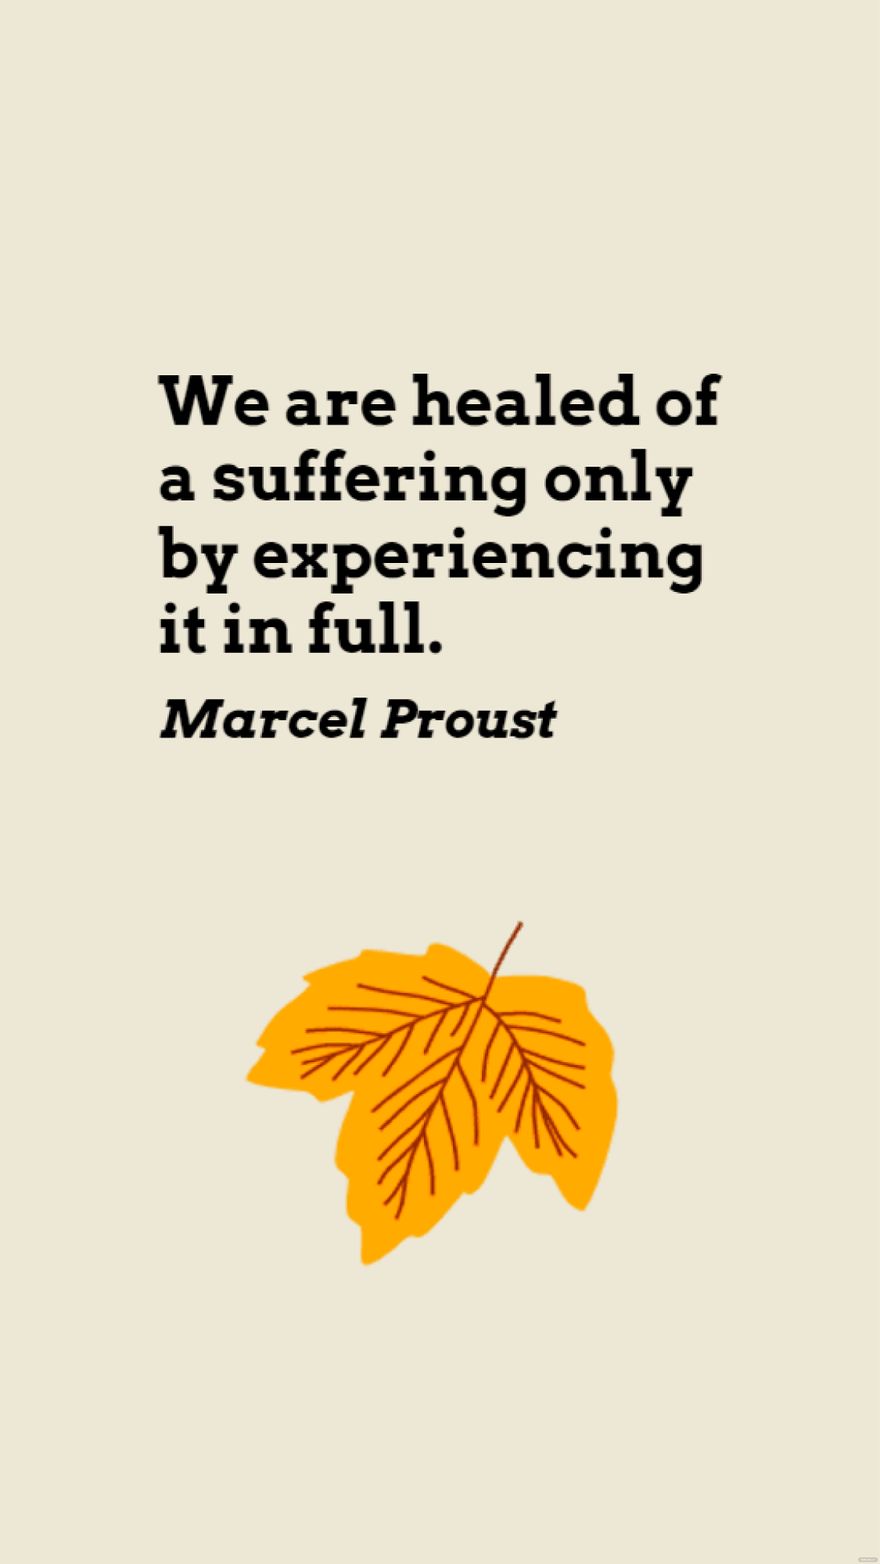 Free Marcel Proust - We are healed of a suffering only by experiencing it in full.